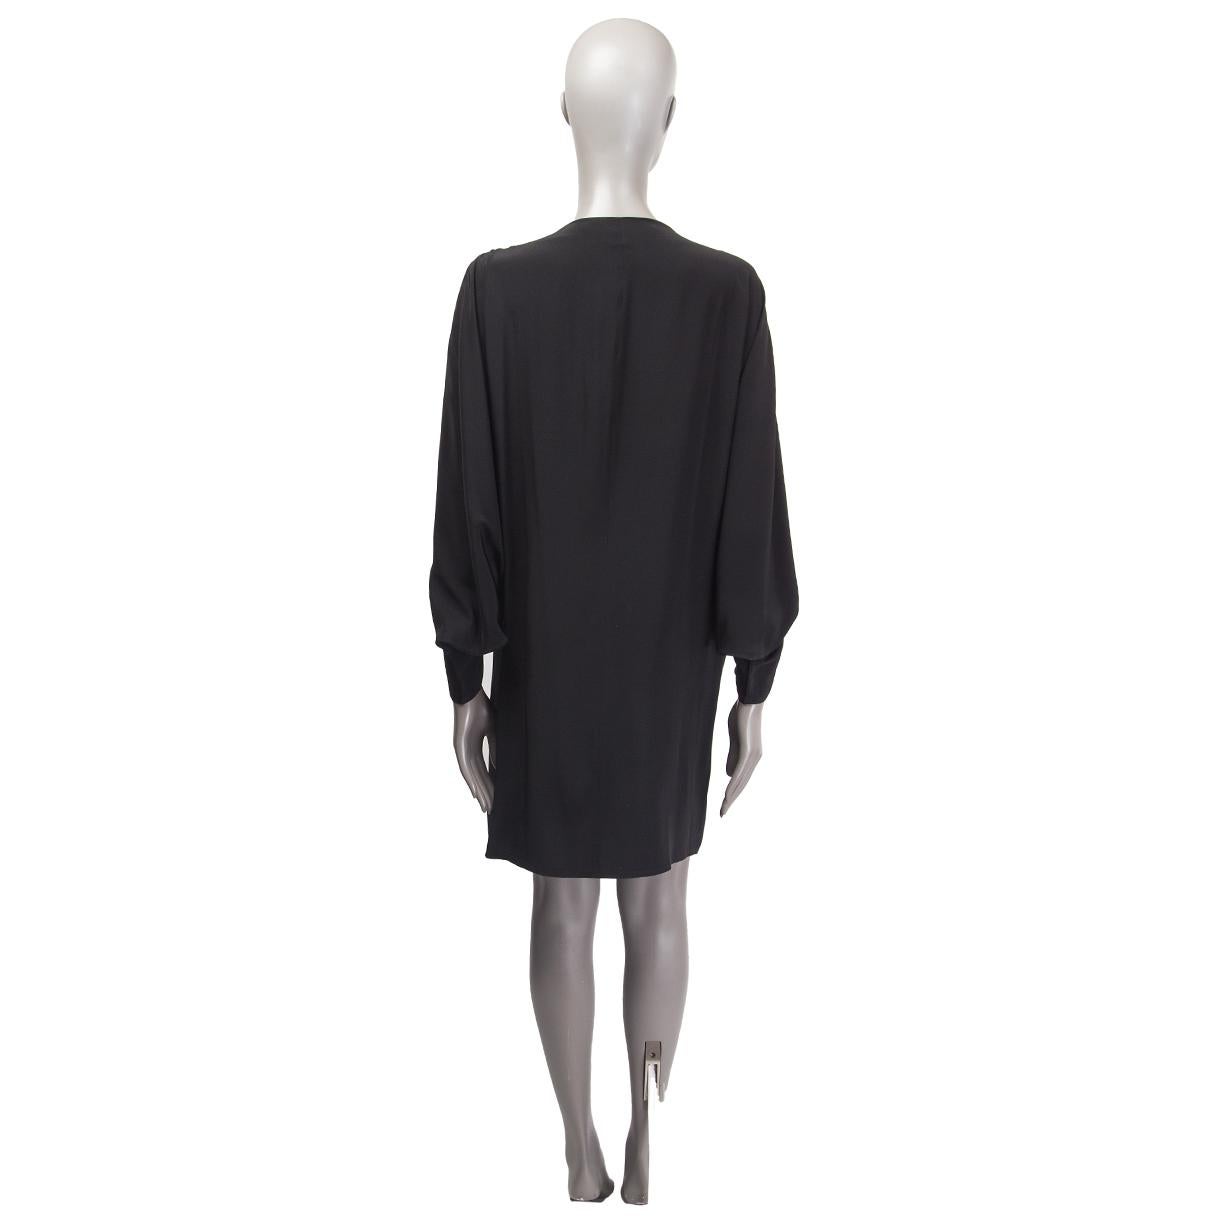 BALENCIAGA black acetate COLD SHOULDER BATWING Cocktail Dress 38 S In Excellent Condition For Sale In Zürich, CH